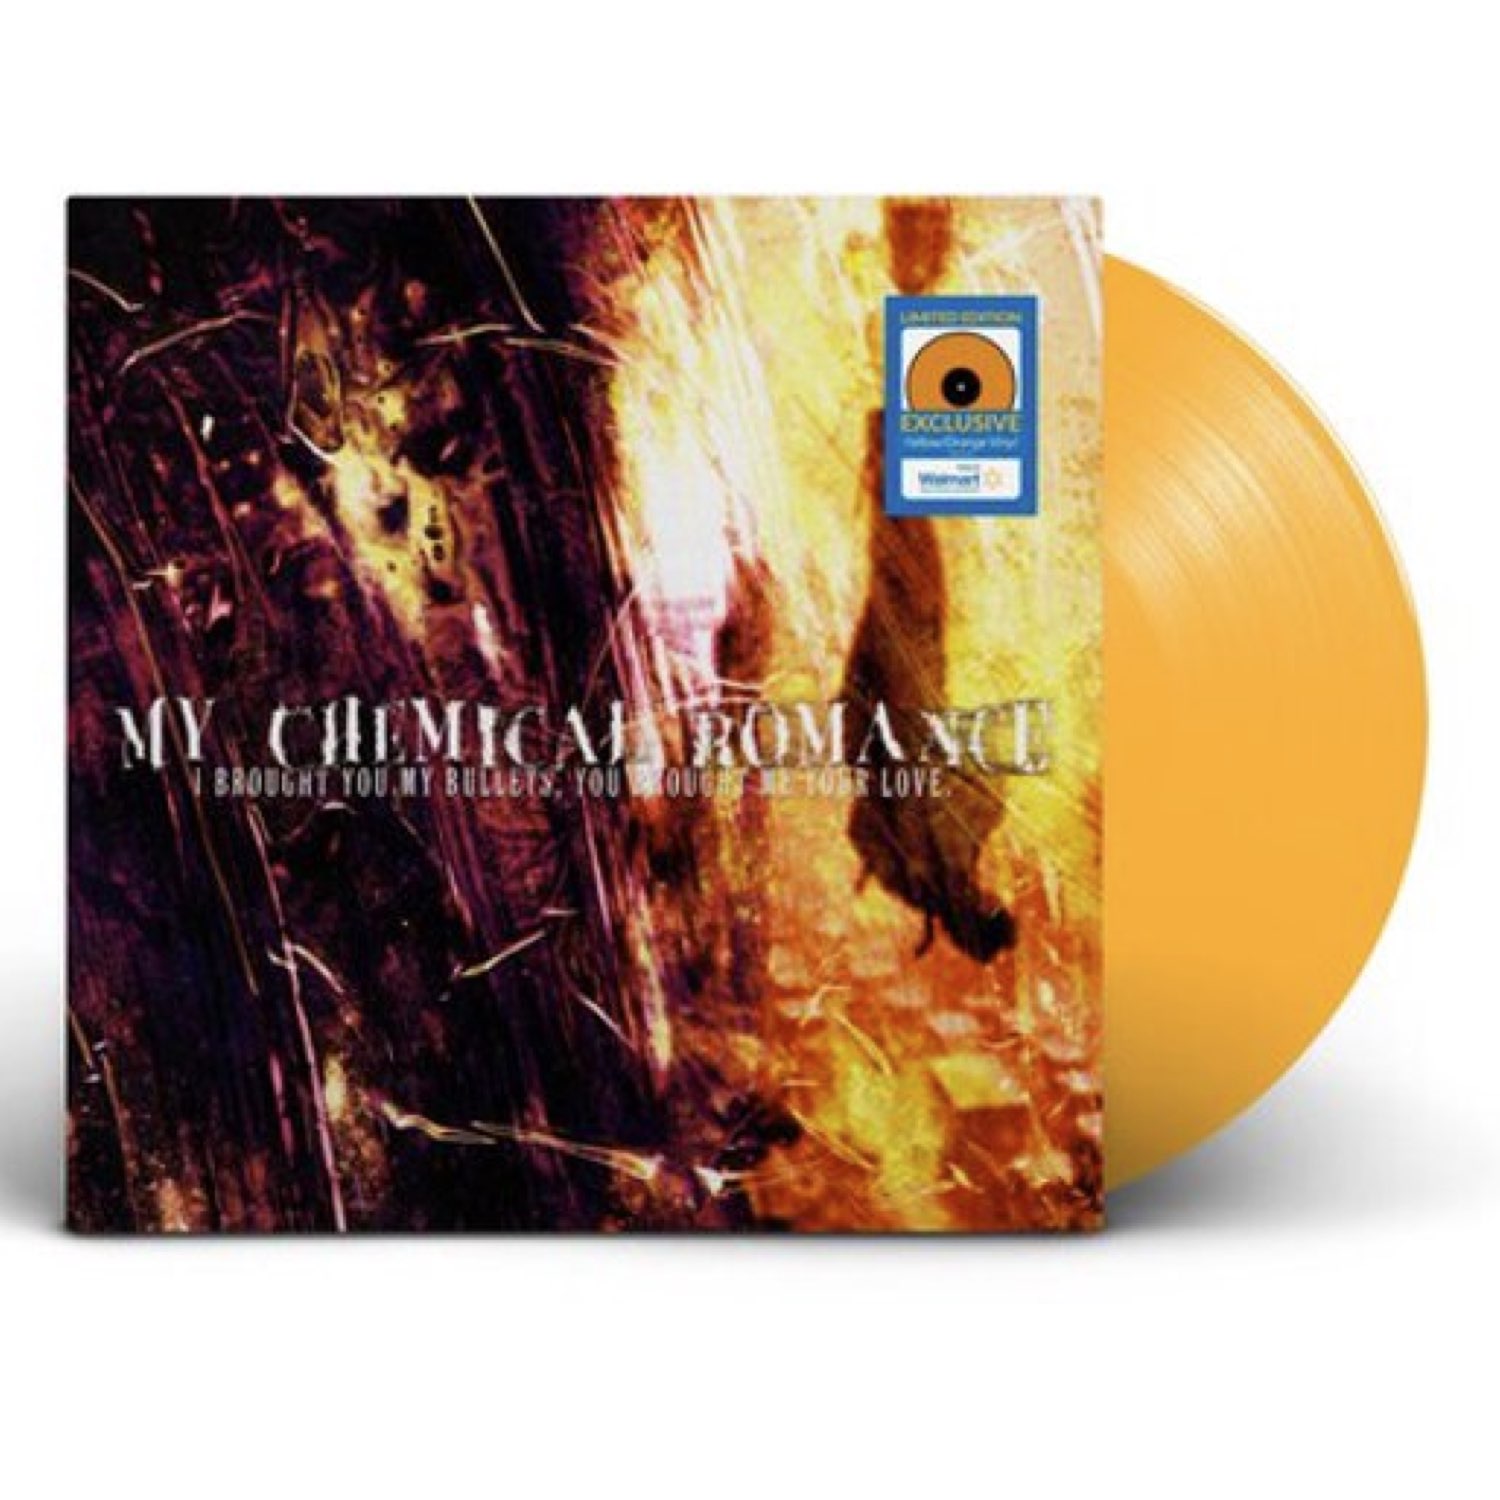 My Chemical Romance - I Brought You My Bullets, You Brought Me Your Love [Yellow/Orange Vinyl] - Walmart Exclusive